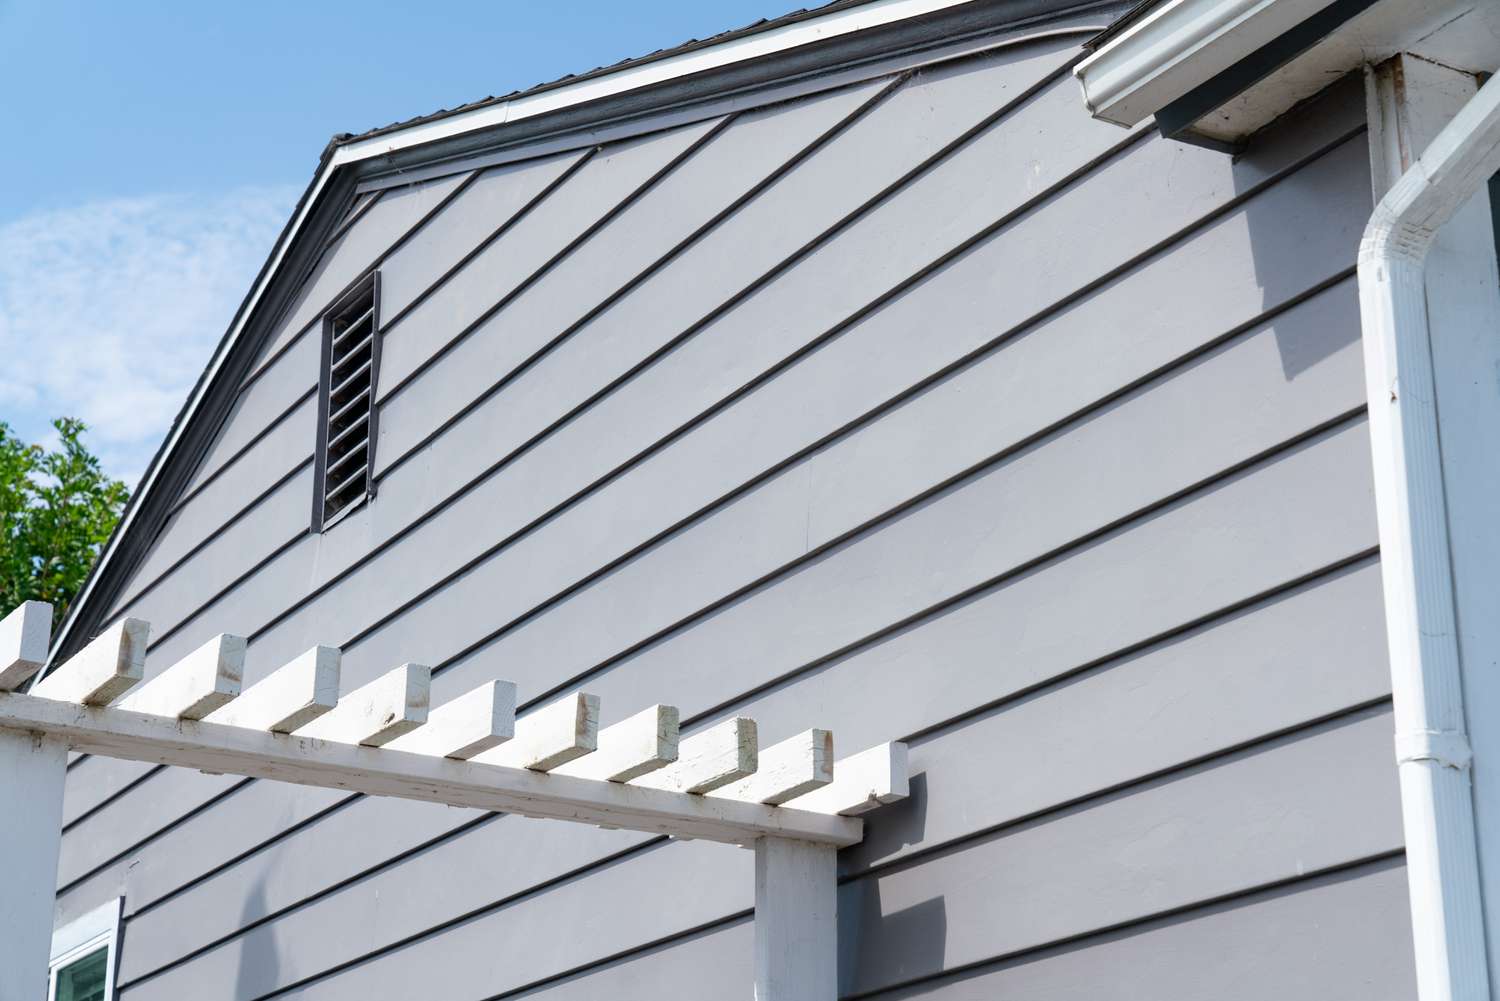 Vinyl siding, commonly worked with by siding installers in Woodstock, Ontario,